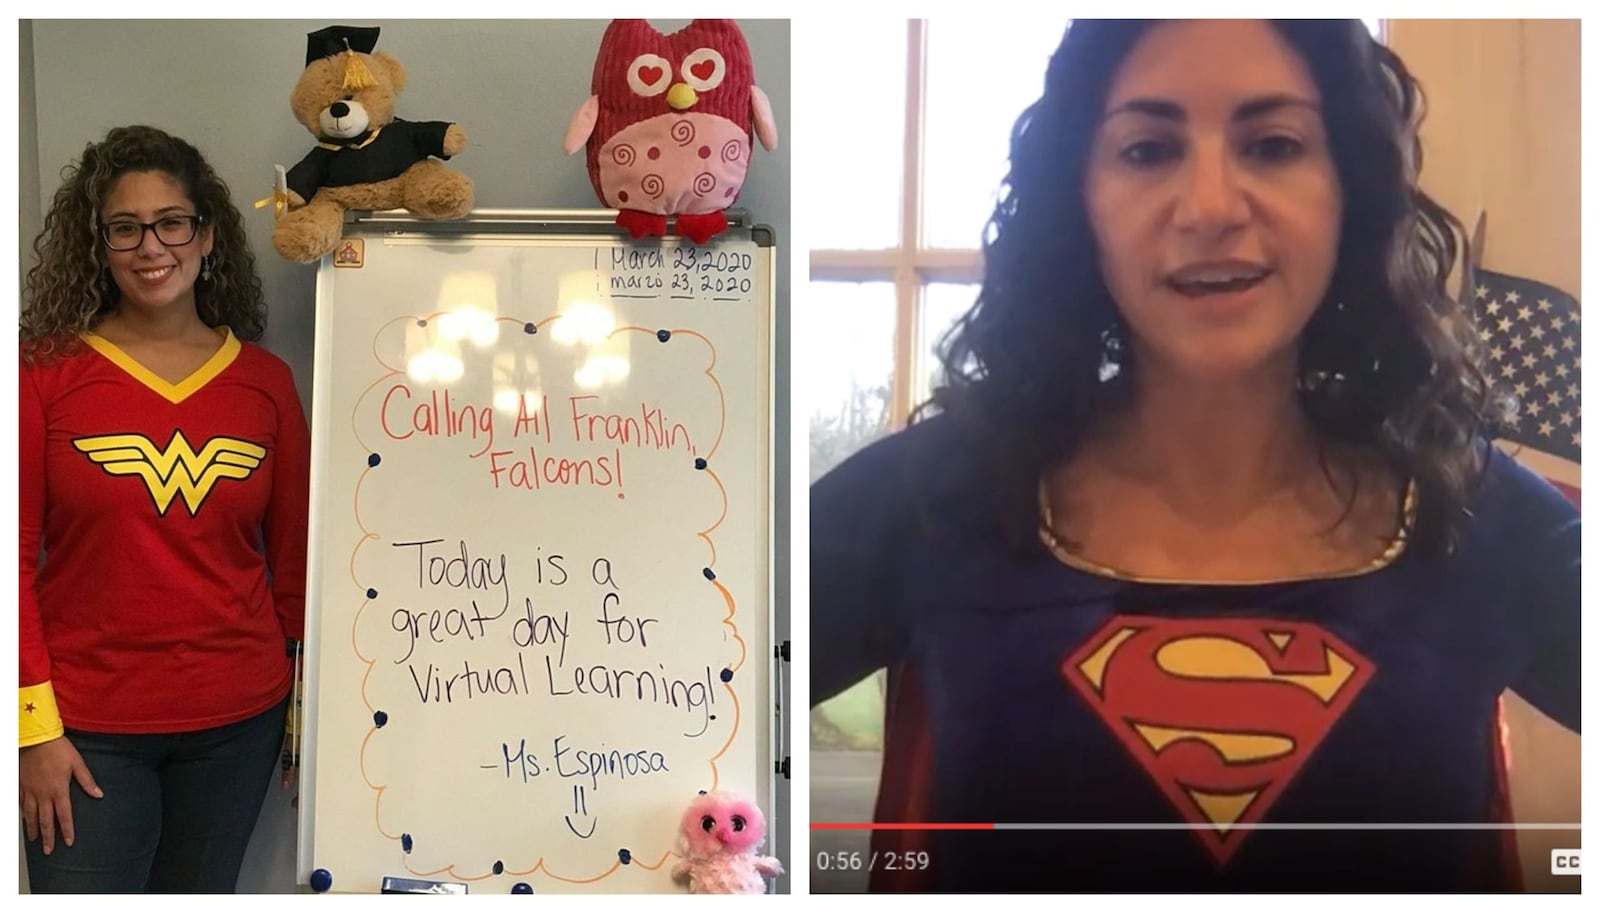 To celebrate "Virtual Learning Spirit Week" at Franklin School, fourth-grade teacher Maria Espinosa (left) and Principal Amy Panitch dressed up as superheroes.